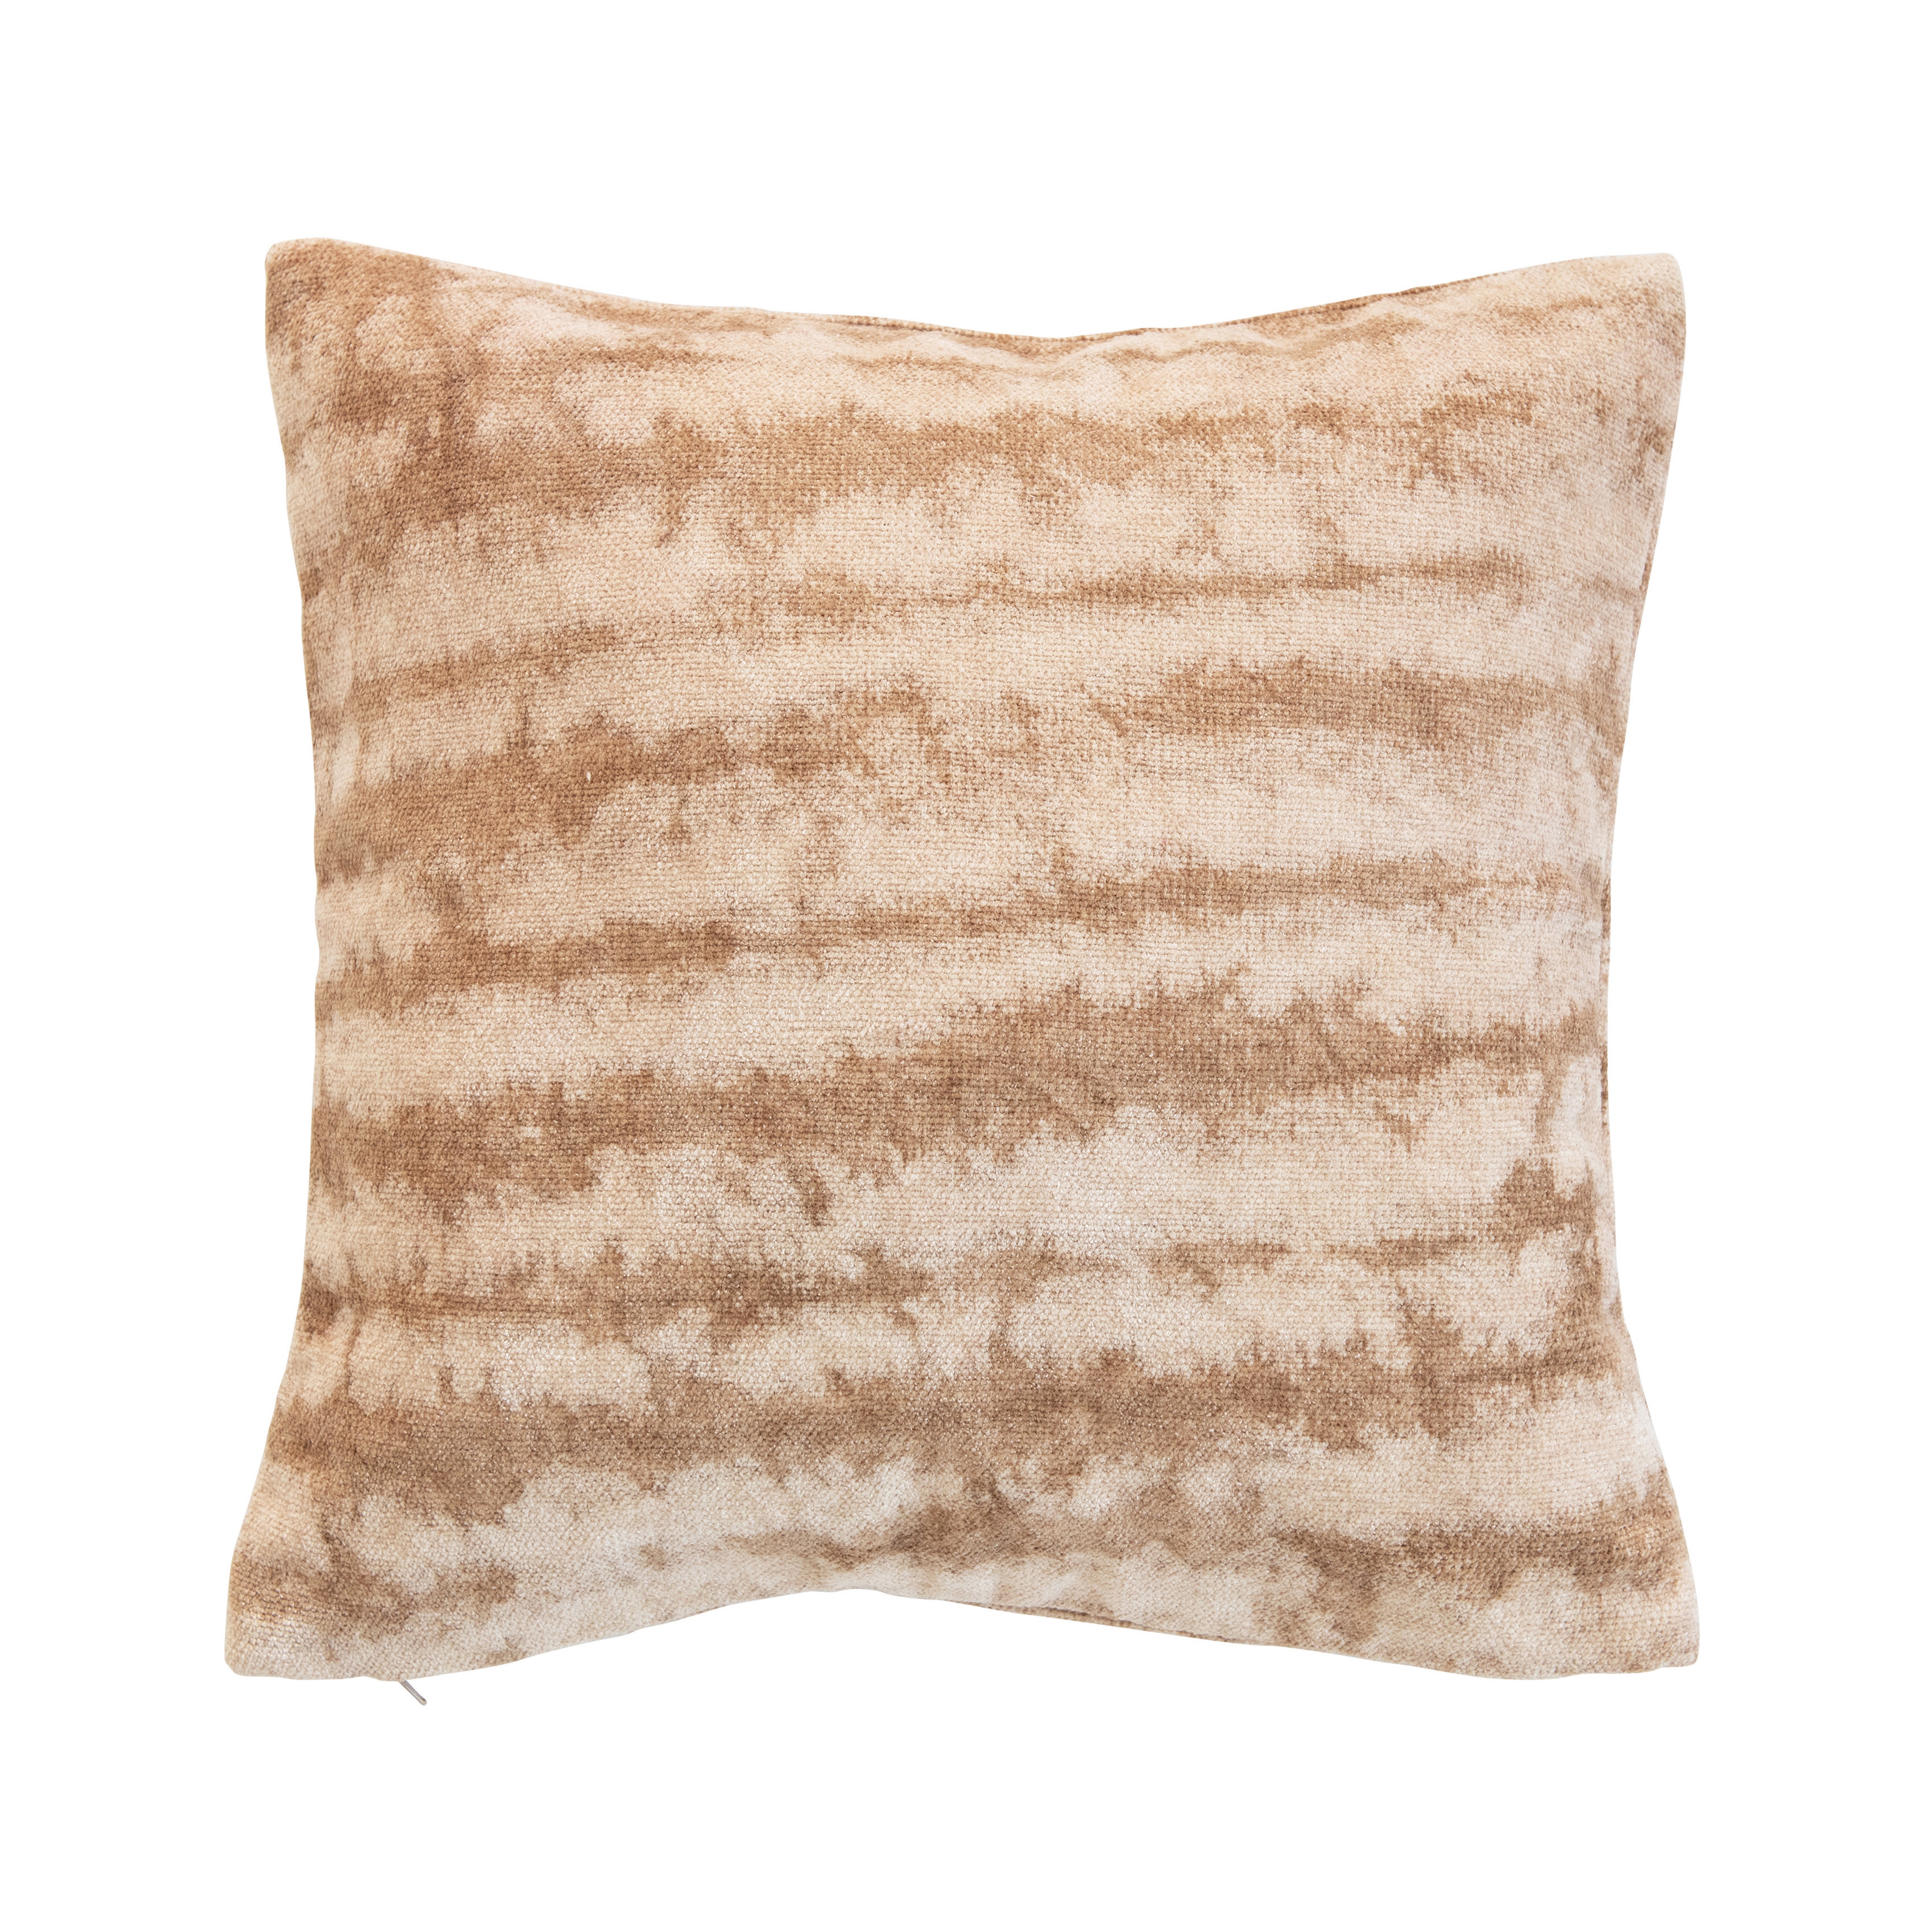 Cotton Blend Tie-Dyed Pillow, Brown & Beige, 18" x 18" - Image 0